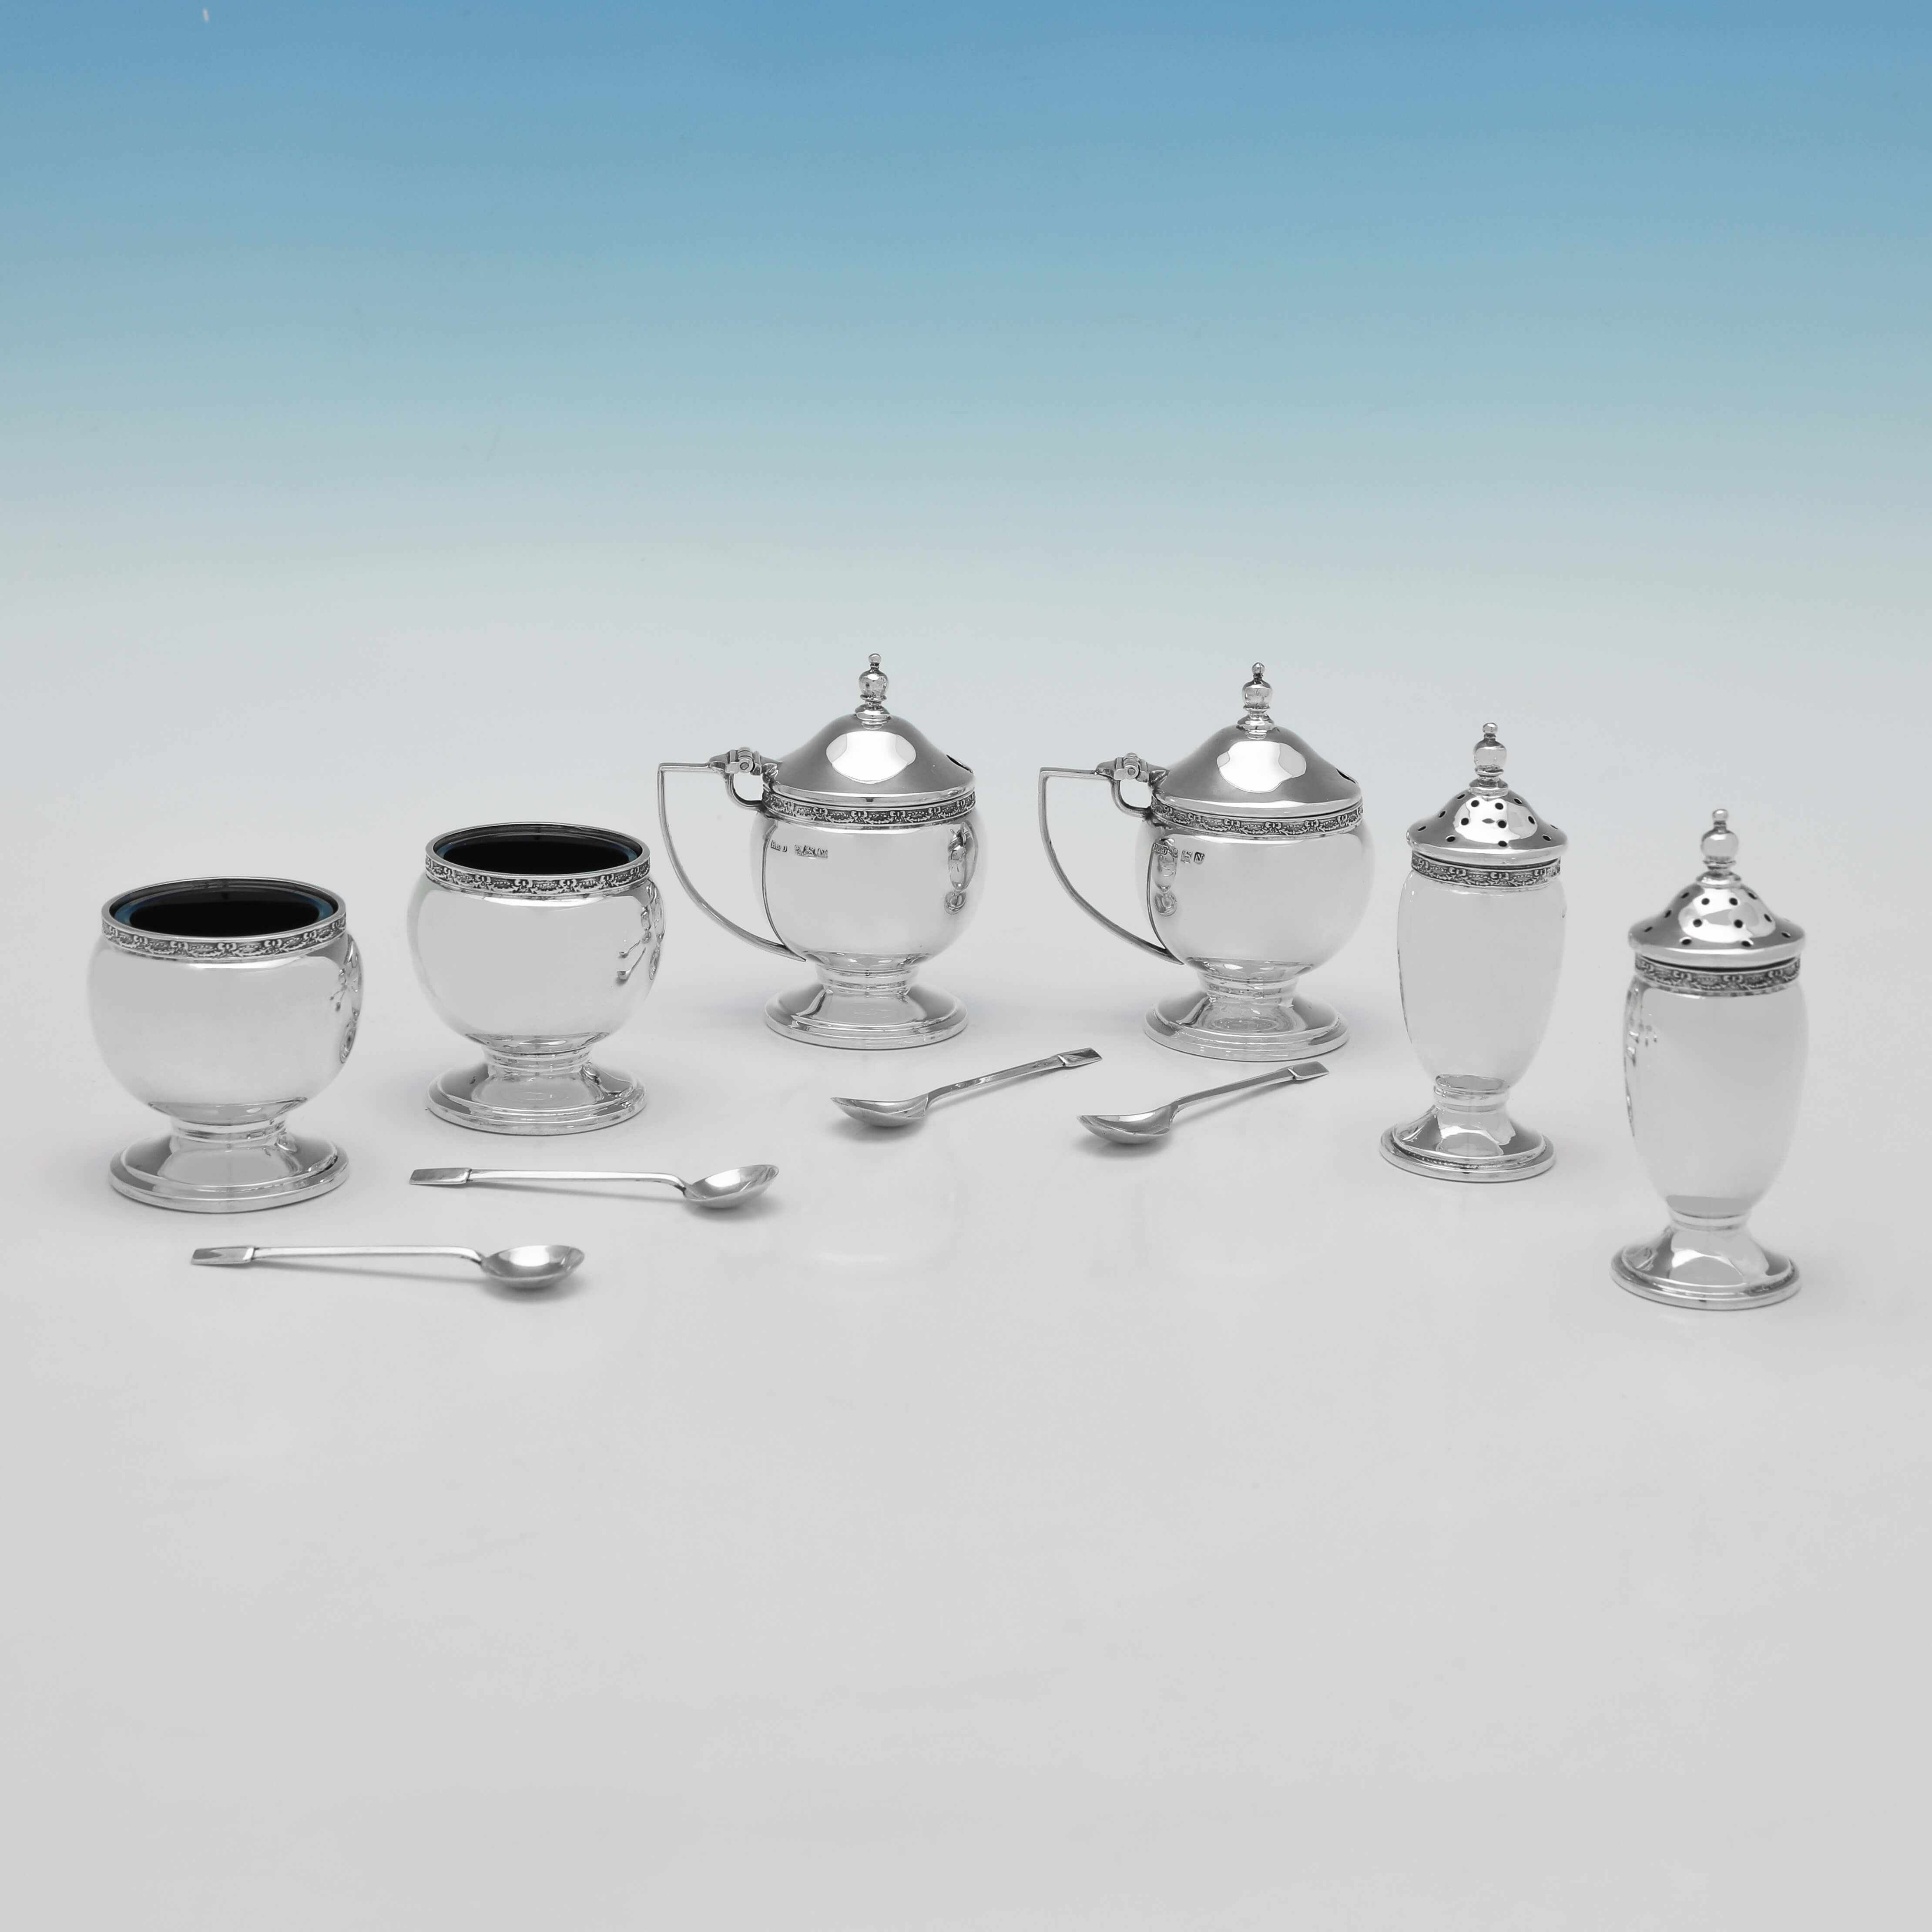 Hallmarked in Birmingham in 1937 by Roberts & Dore, this handsome, Sterling Silver Condiment Set, is in the Art Deco taste, and is presented in its original box. 

Each mustard pot measures 2.75